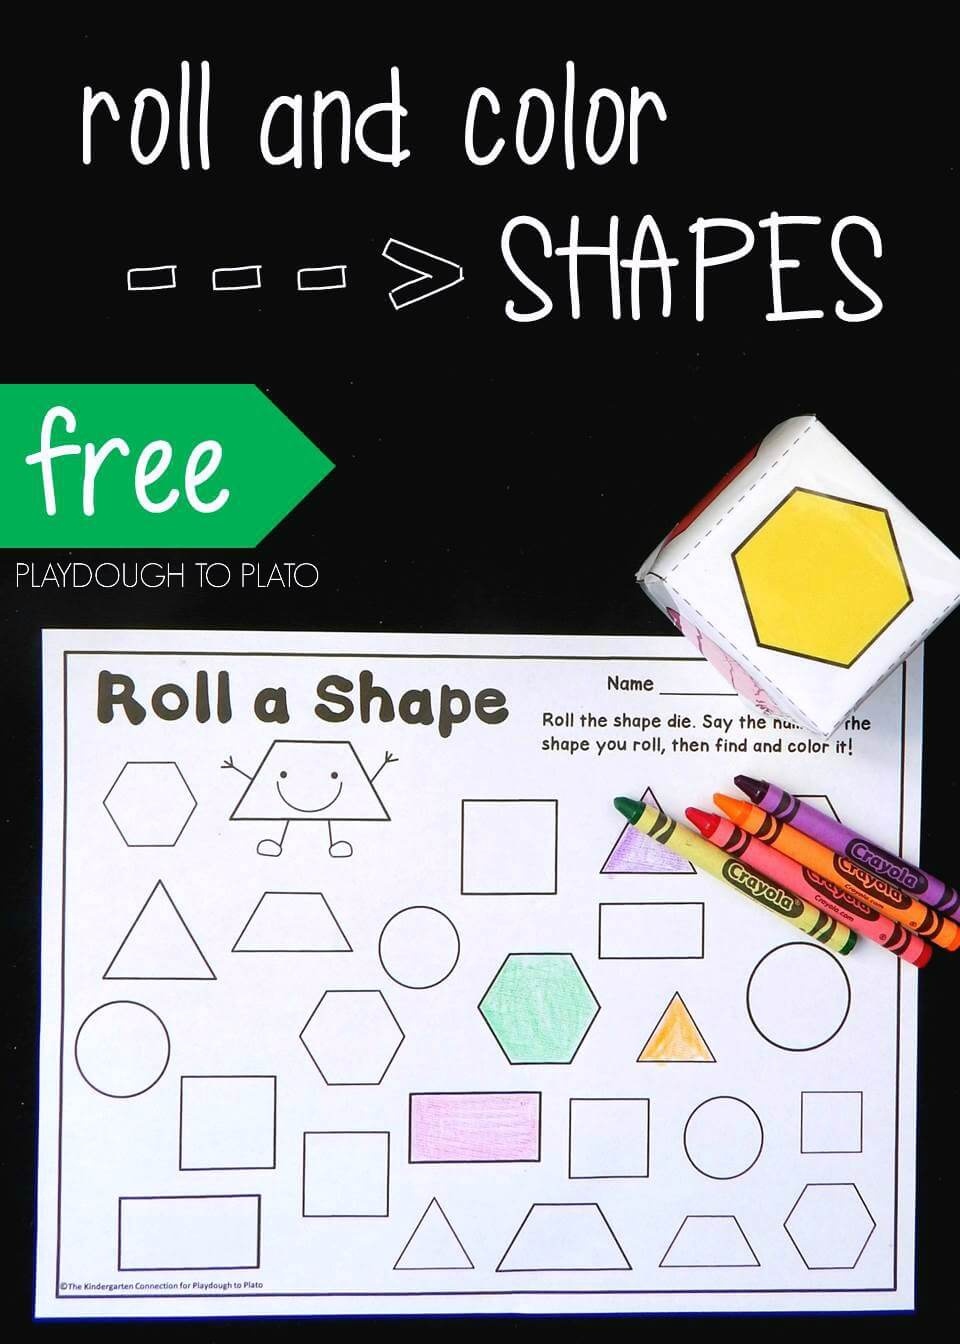 Roll And Color Shapes - Playdough To Plato - Roll A Monster Free Printable